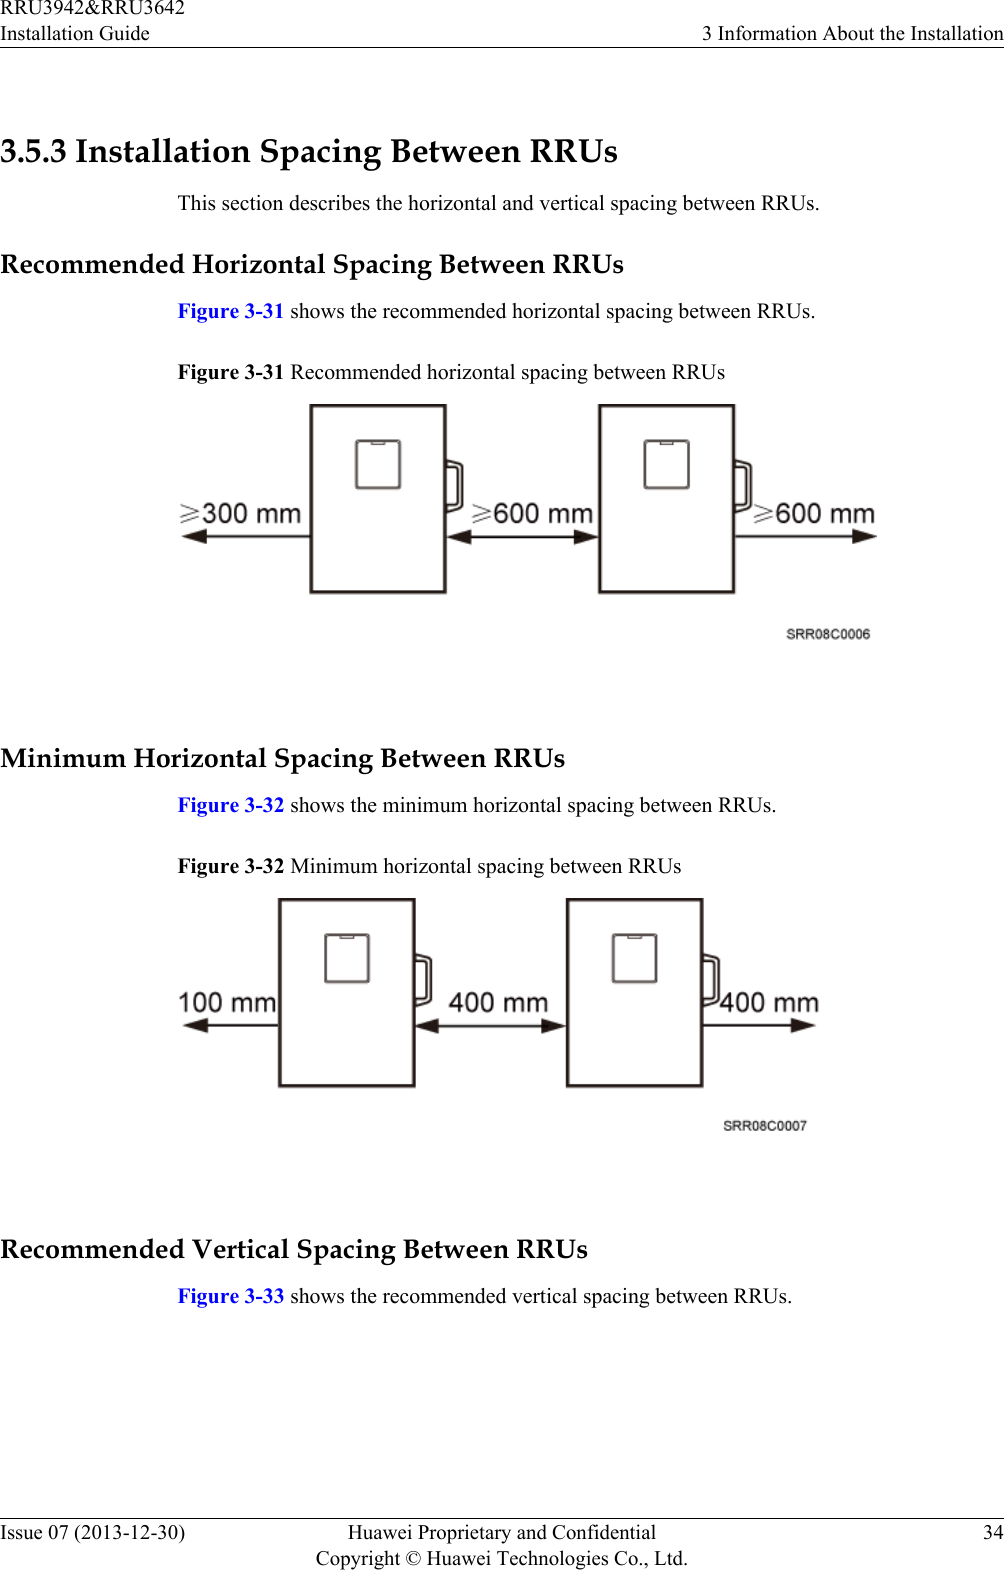  3.5.3 Installation Spacing Between RRUsThis section describes the horizontal and vertical spacing between RRUs.Recommended Horizontal Spacing Between RRUsFigure 3-31 shows the recommended horizontal spacing between RRUs.Figure 3-31 Recommended horizontal spacing between RRUs Minimum Horizontal Spacing Between RRUsFigure 3-32 shows the minimum horizontal spacing between RRUs.Figure 3-32 Minimum horizontal spacing between RRUs Recommended Vertical Spacing Between RRUsFigure 3-33 shows the recommended vertical spacing between RRUs.RRU3942&amp;RRU3642Installation Guide 3 Information About the InstallationIssue 07 (2013-12-30) Huawei Proprietary and ConfidentialCopyright © Huawei Technologies Co., Ltd.34